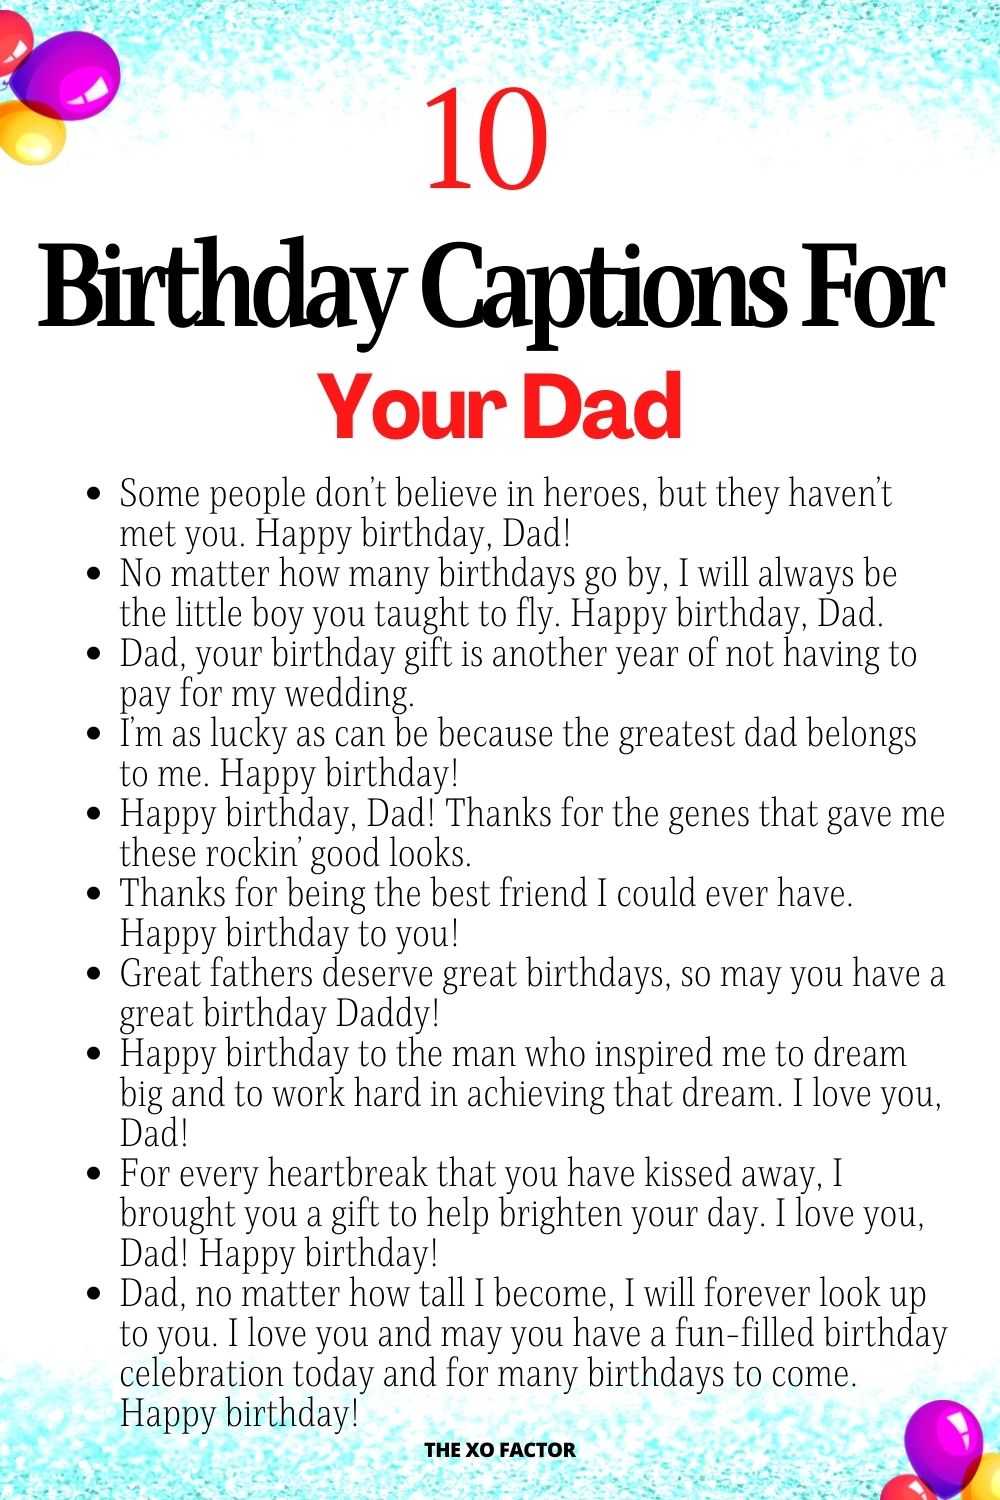 Birthday Captions For Your Dad